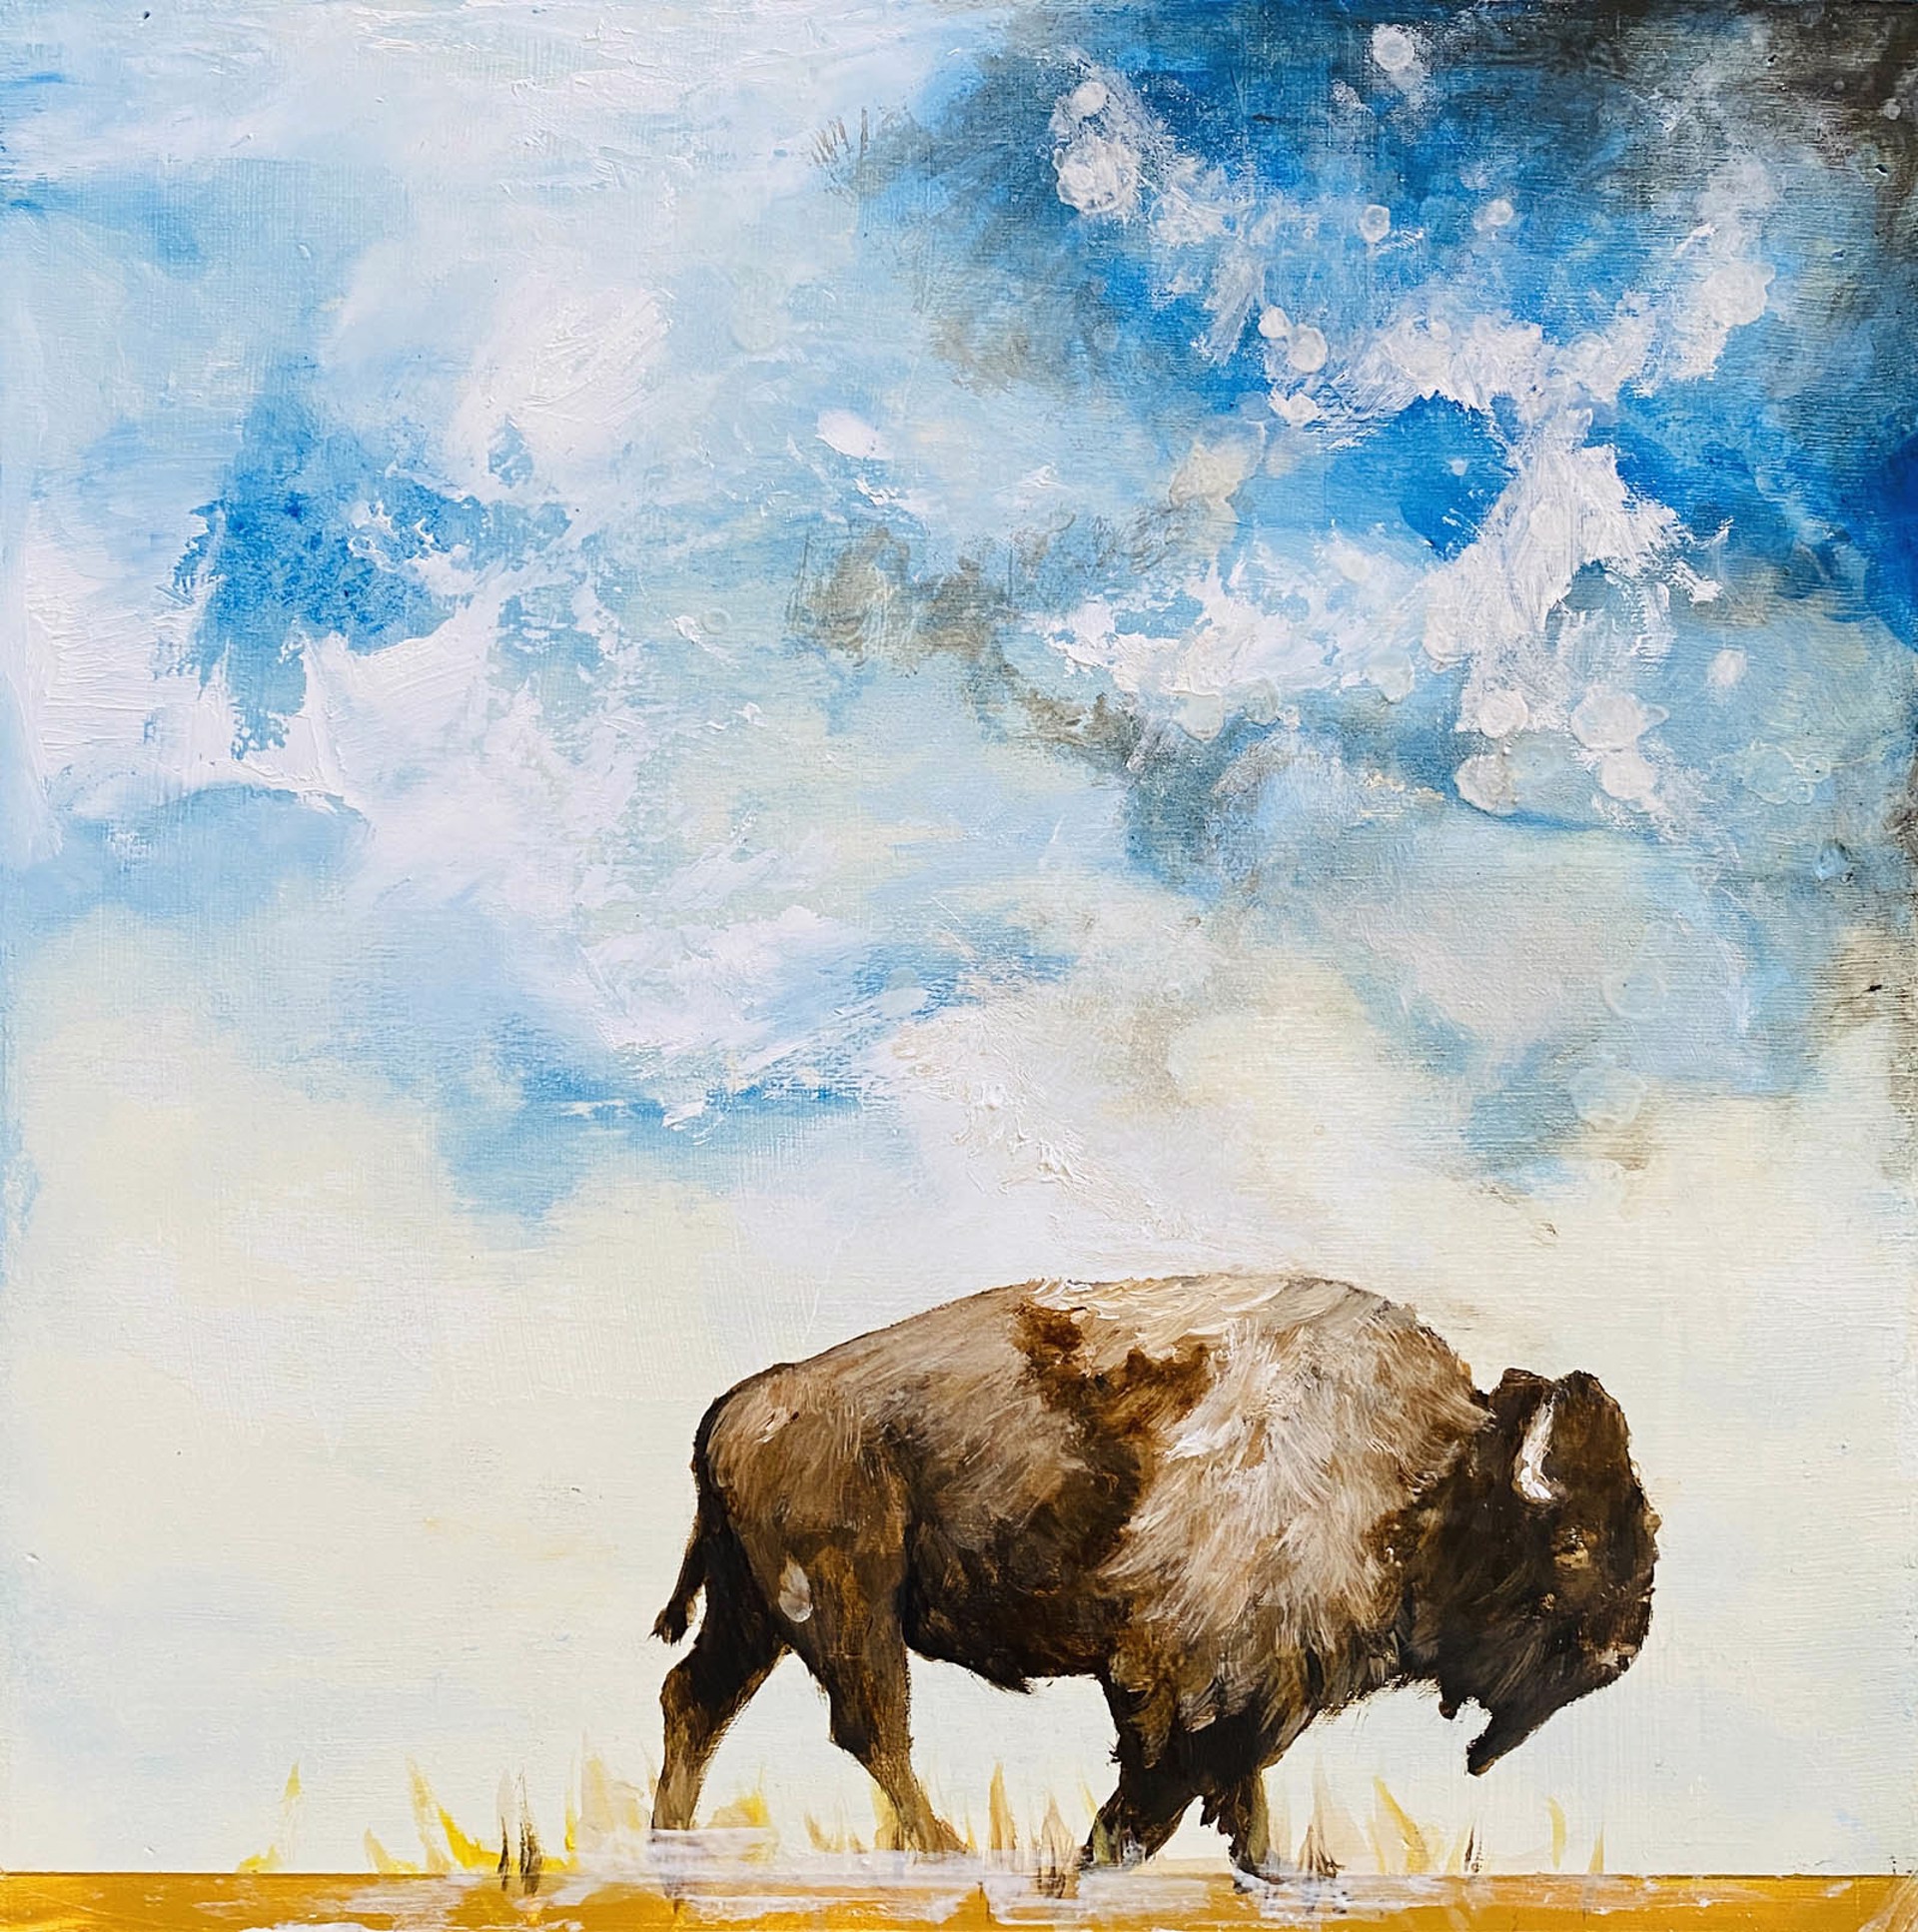 Original Oil Painting Featuring A Bison Walking With Abstract Blue Sky